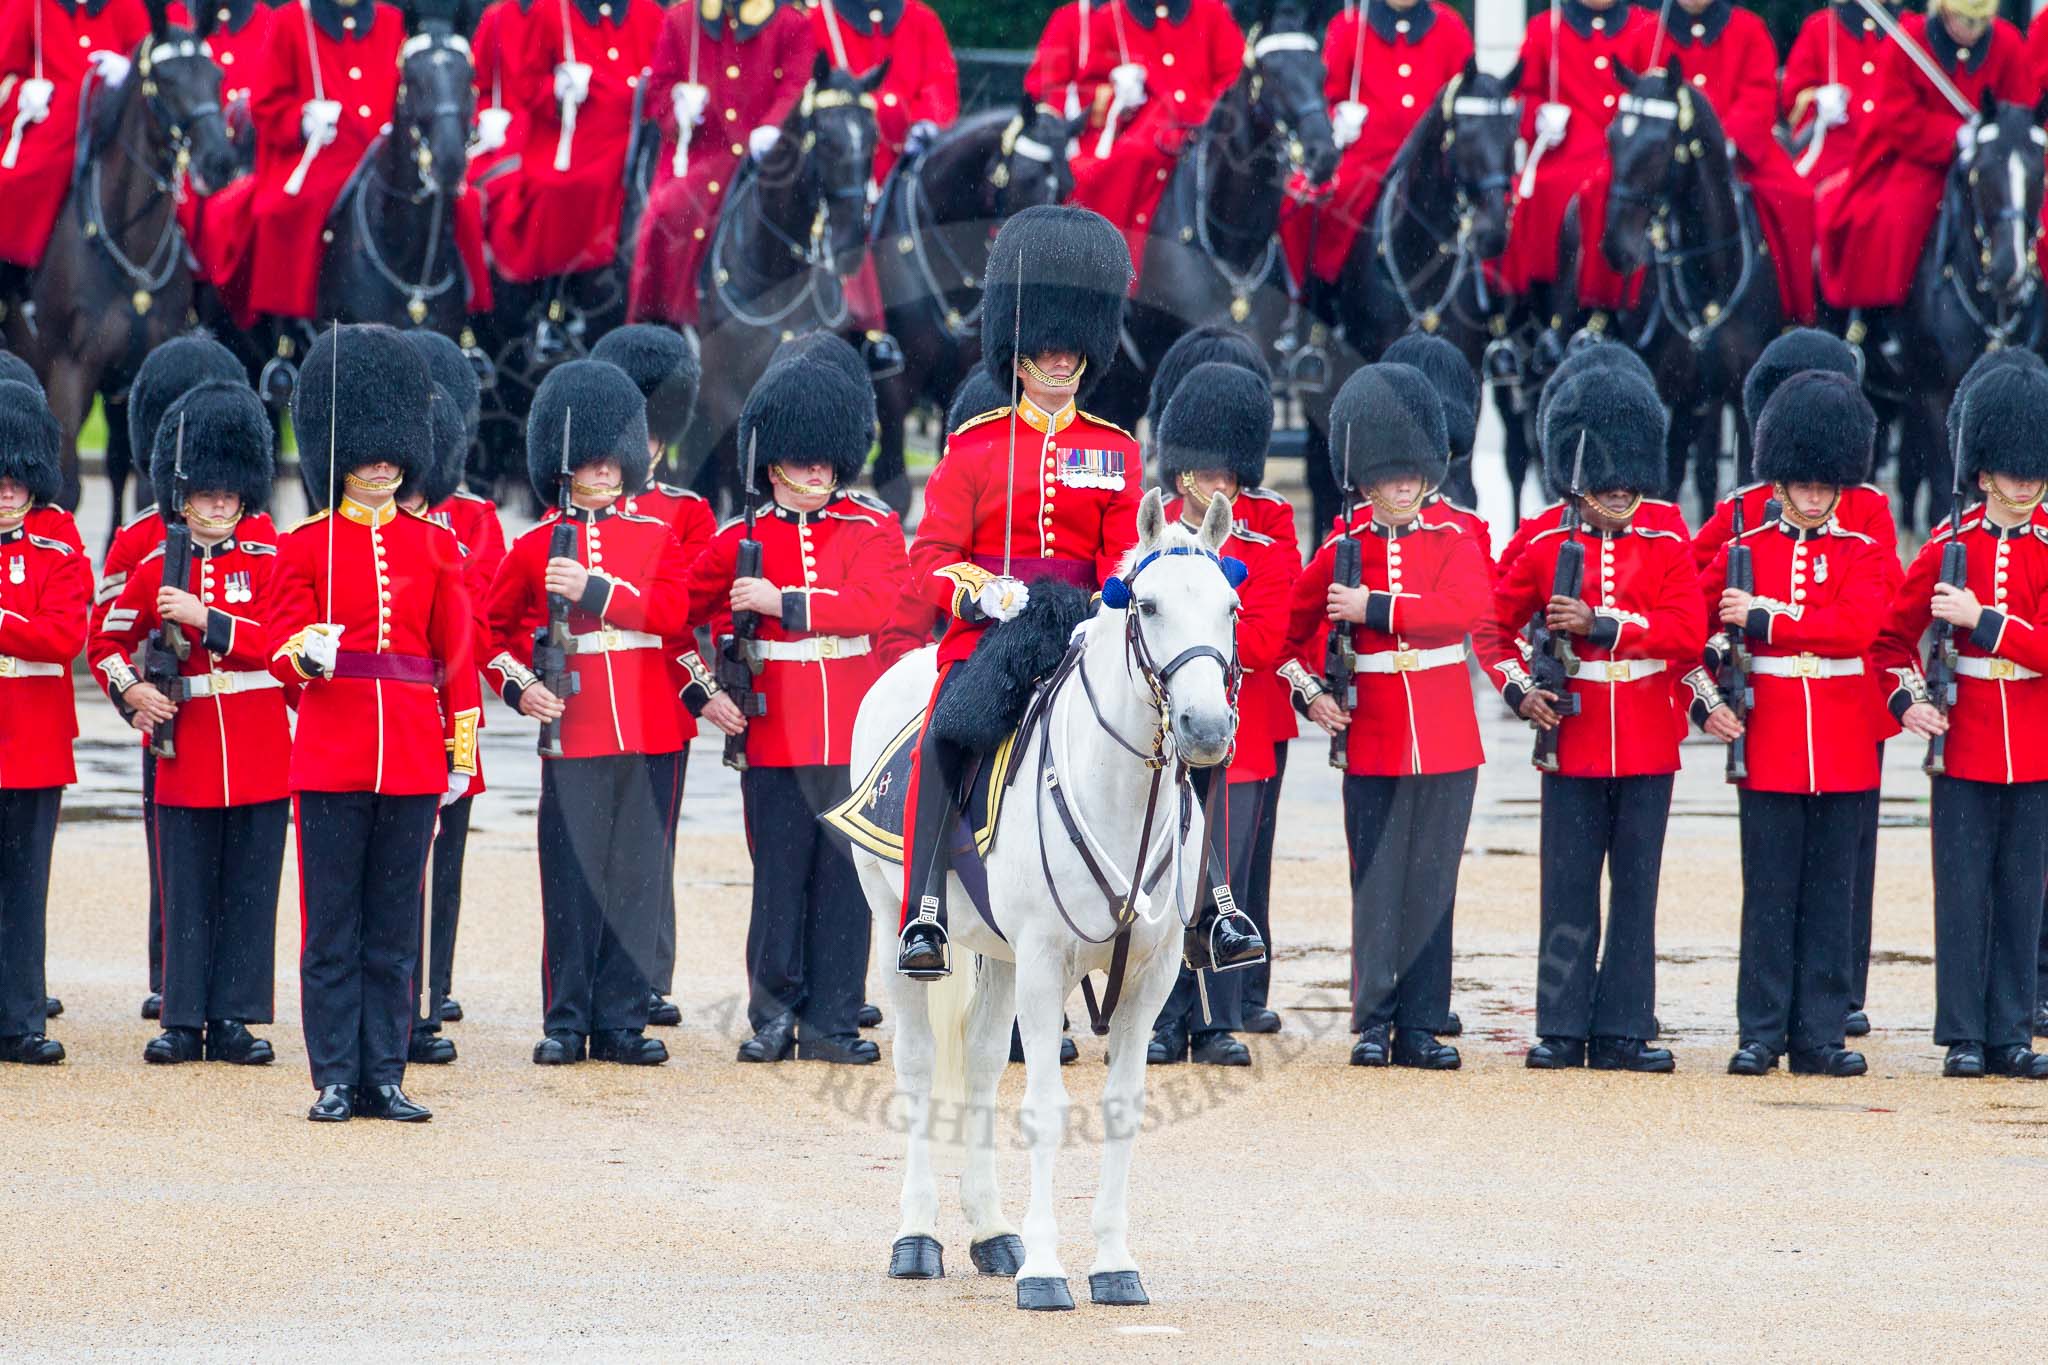 The Colonel's Review 2014.
Horse Guards Parade, Westminster,
London,

United Kingdom,
on 07 June 2014 at 11:00, image #270